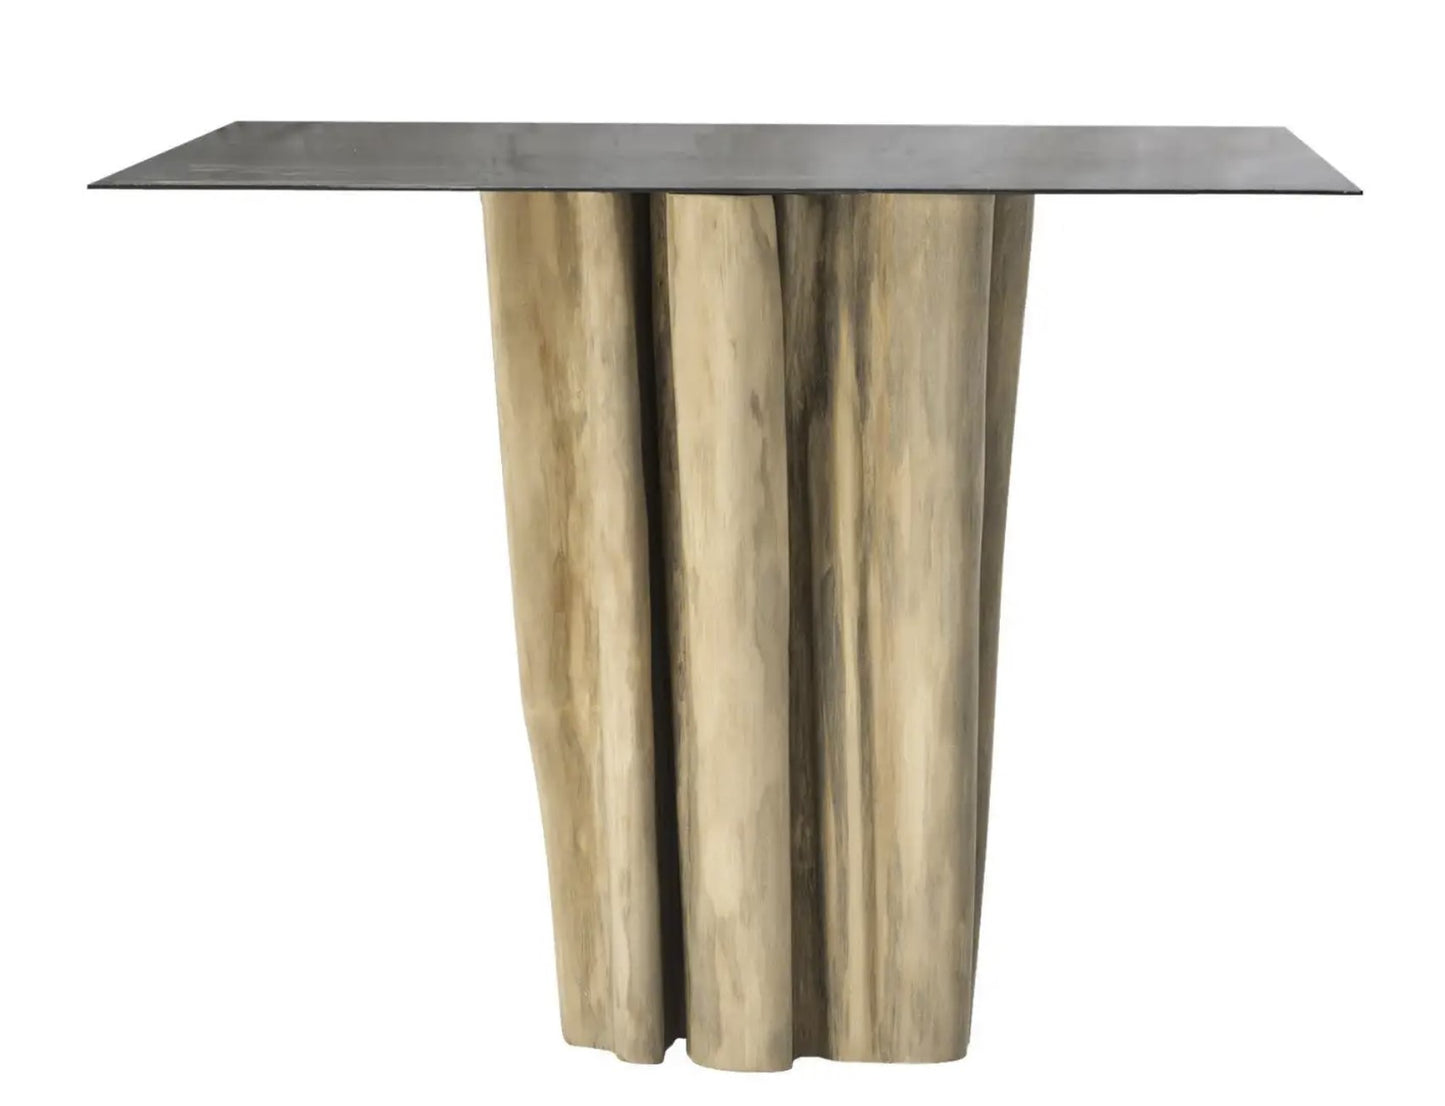 Square Brick Table in Waxed Iron Top with Natural Base - $4,130.00